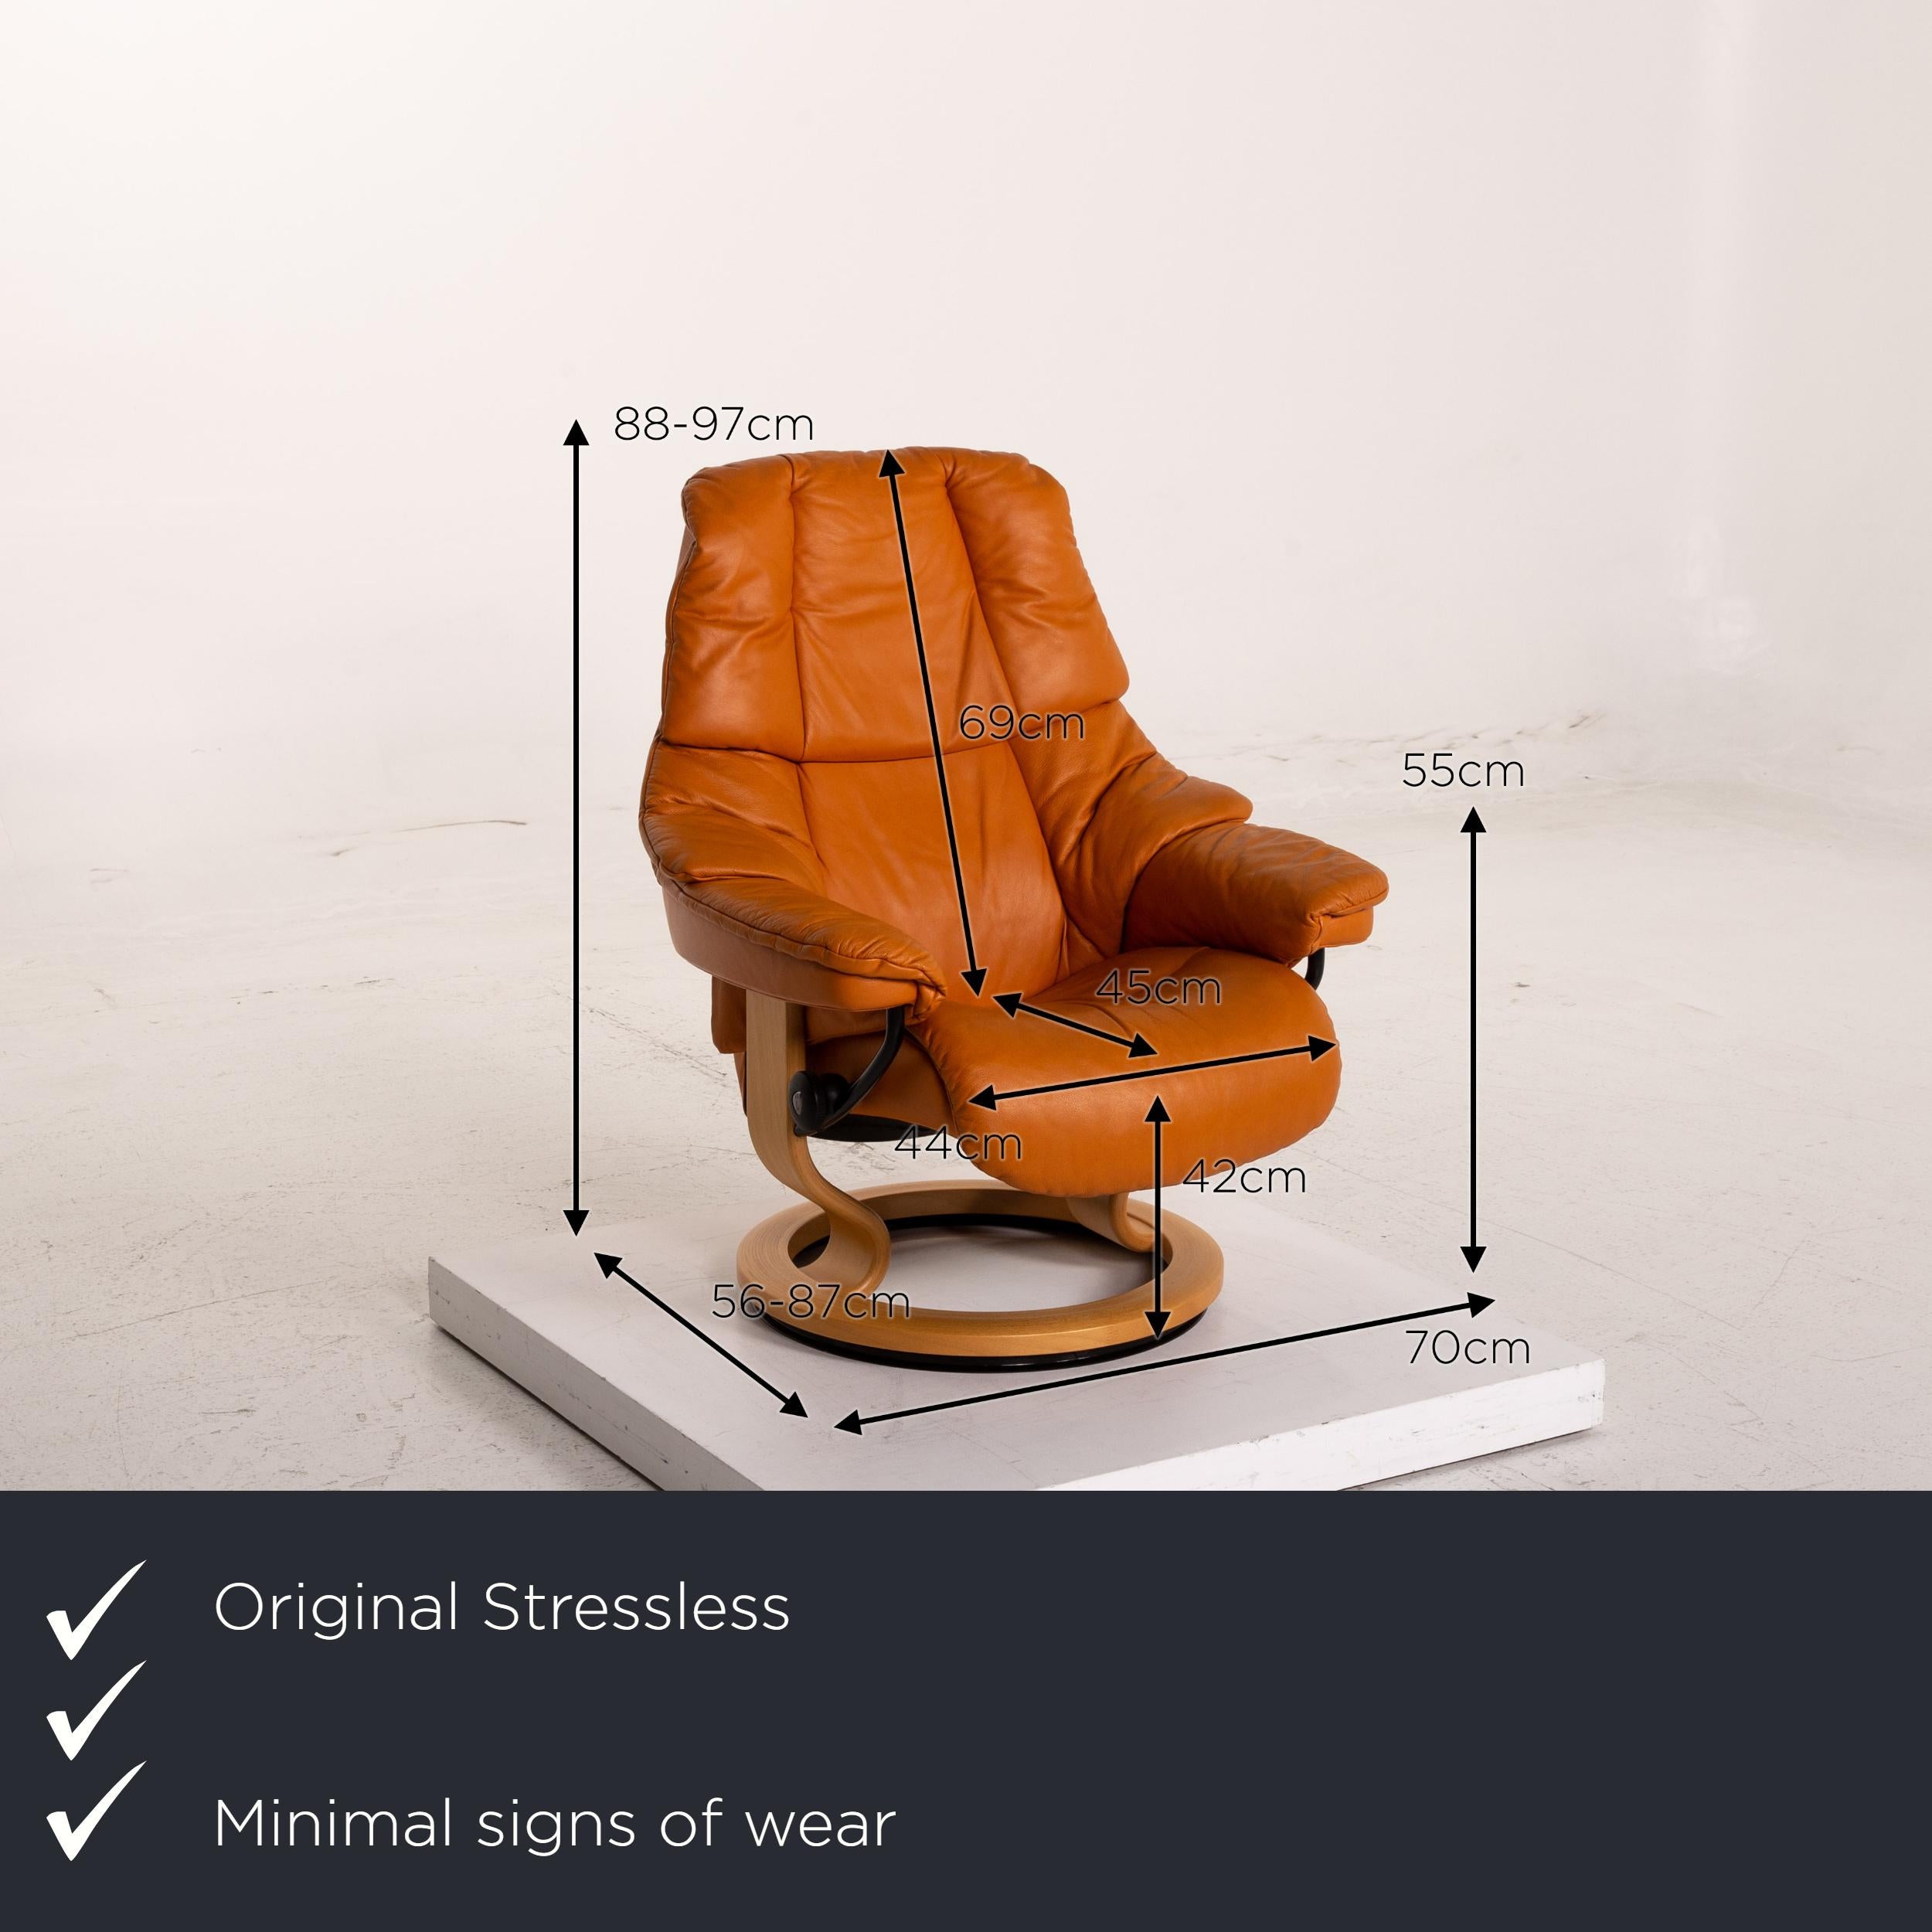 We present to you a Stressless Reno leather armchair orange relax function incl. Stool.
 

 Product measurements in centimeters:
 

Depth: 56
Width: 70
Height: 88
Seat height: 42
Rest height: 55
Seat depth: 45
Seat width: 44
Back